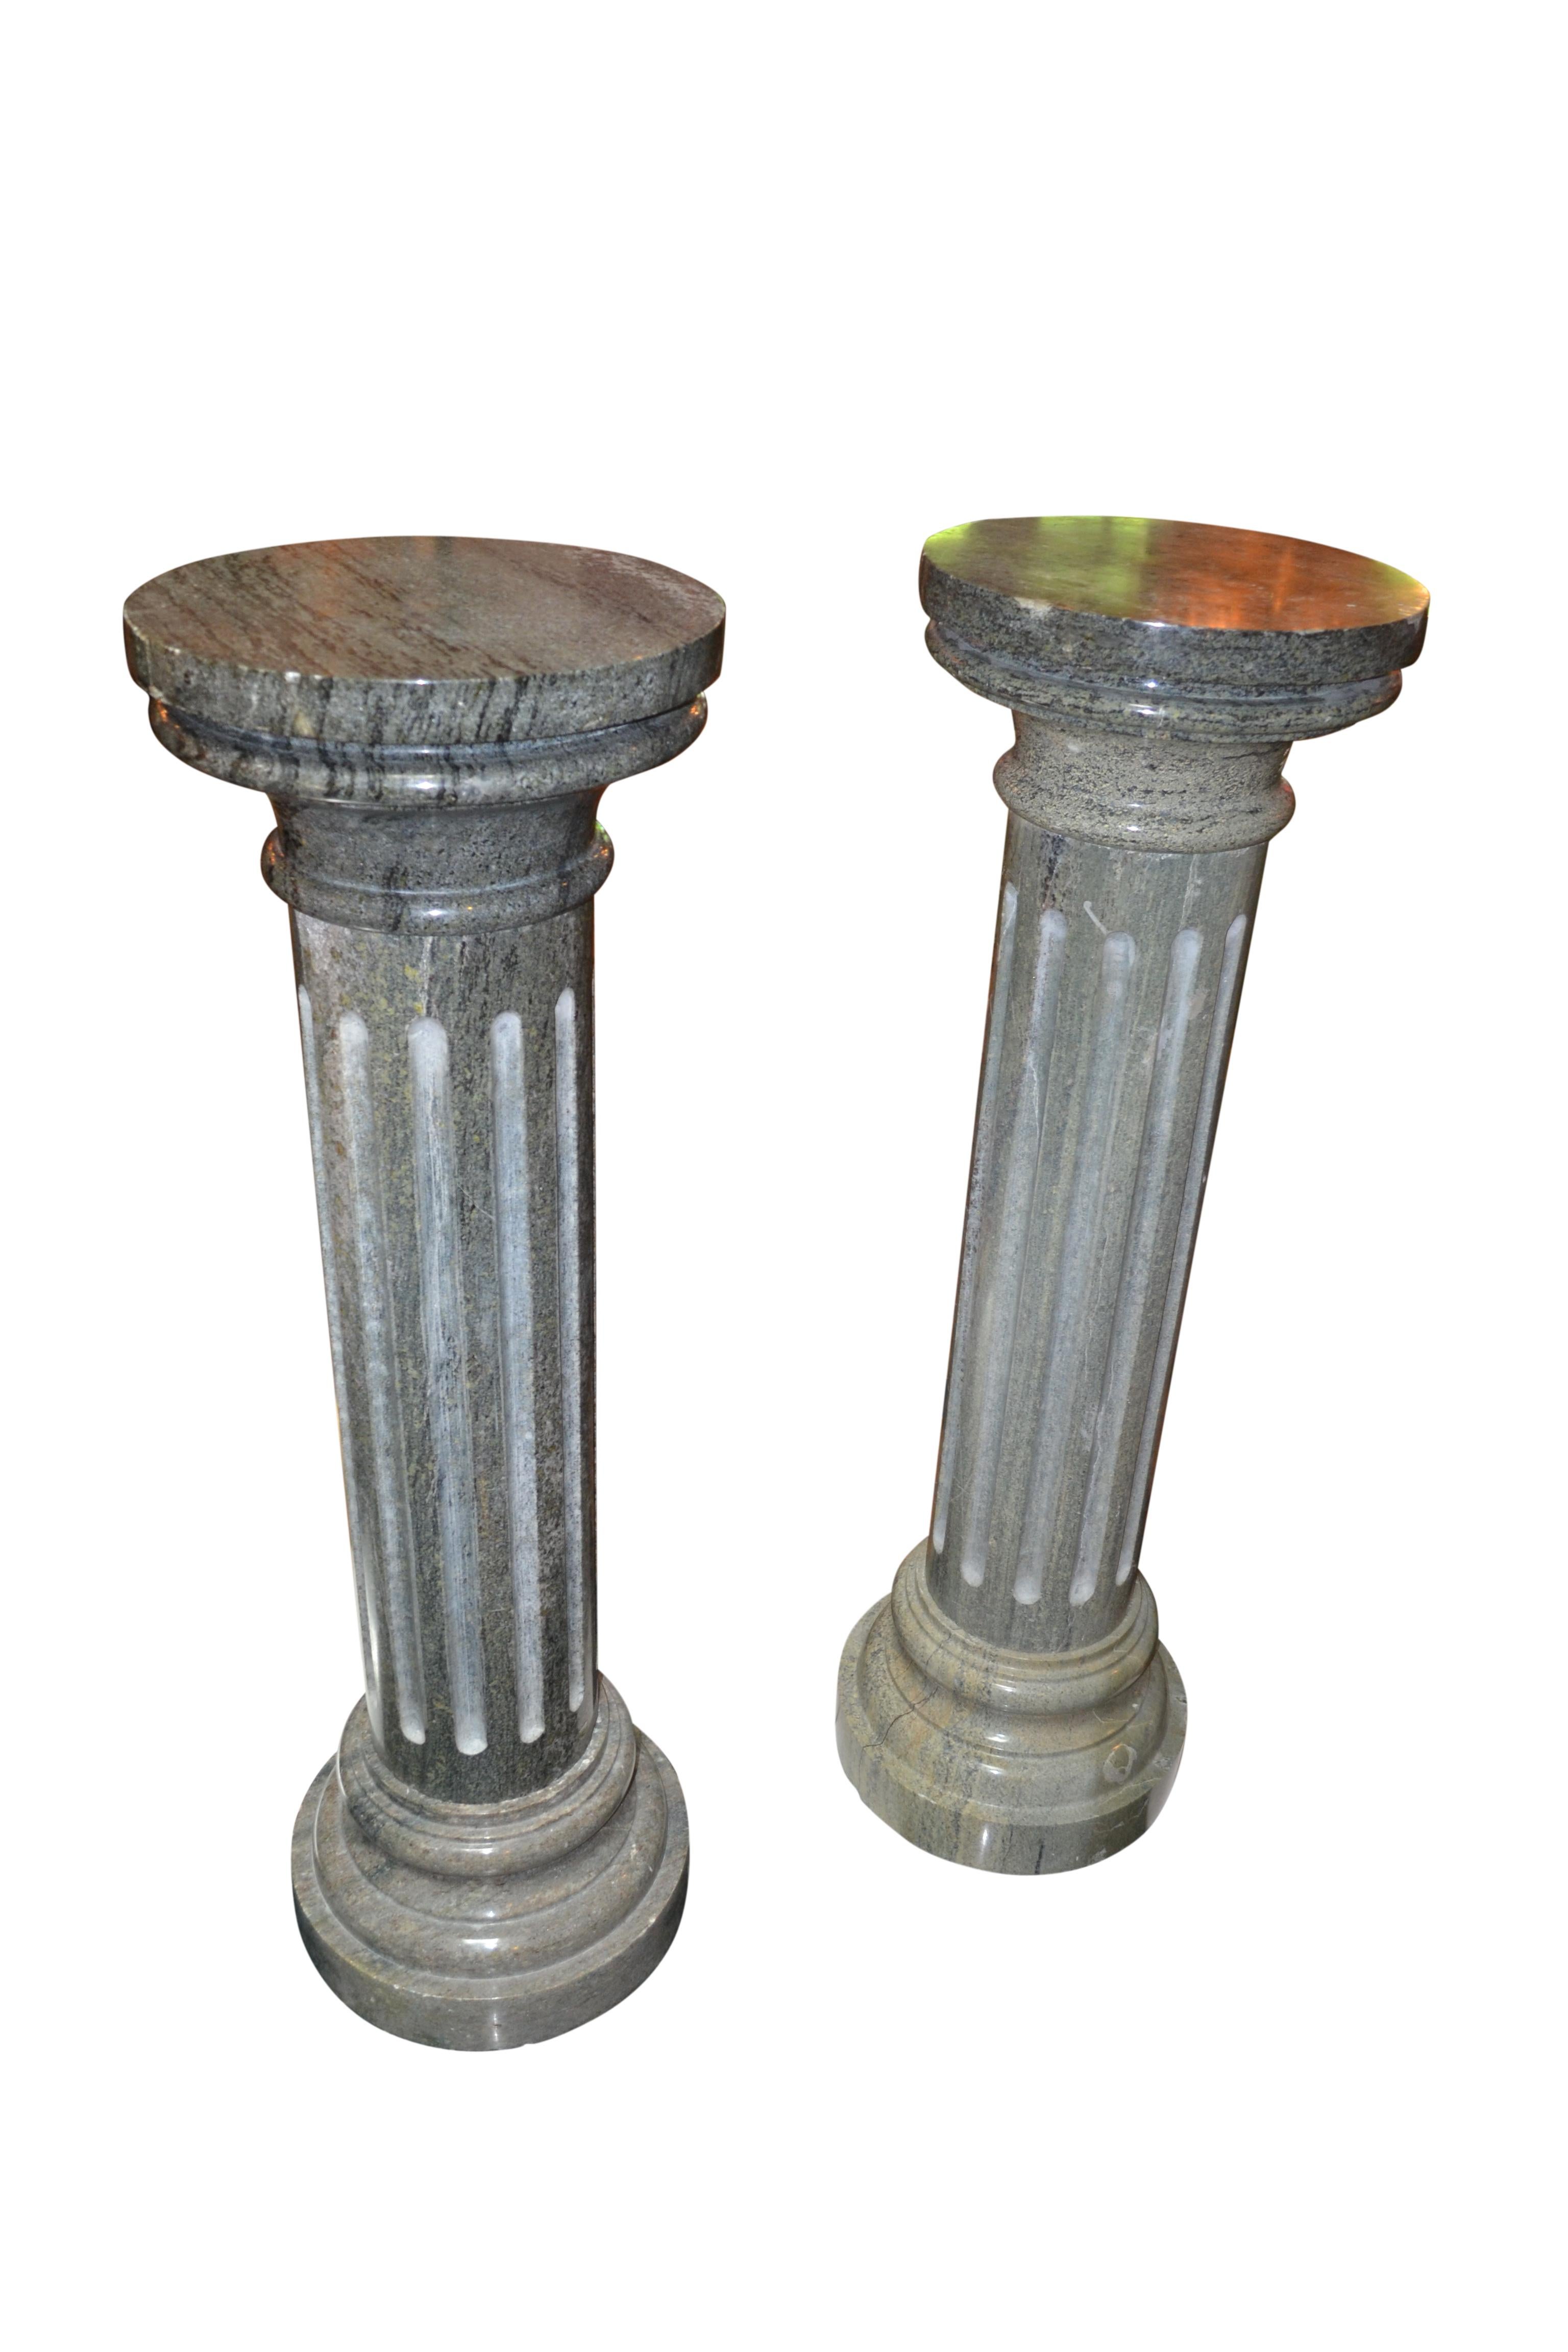 A pair of fluted round marble columns, the marble being a mid green colour with grey veining; both with circular tops and bottoms; likely Italian late 19thC. 
